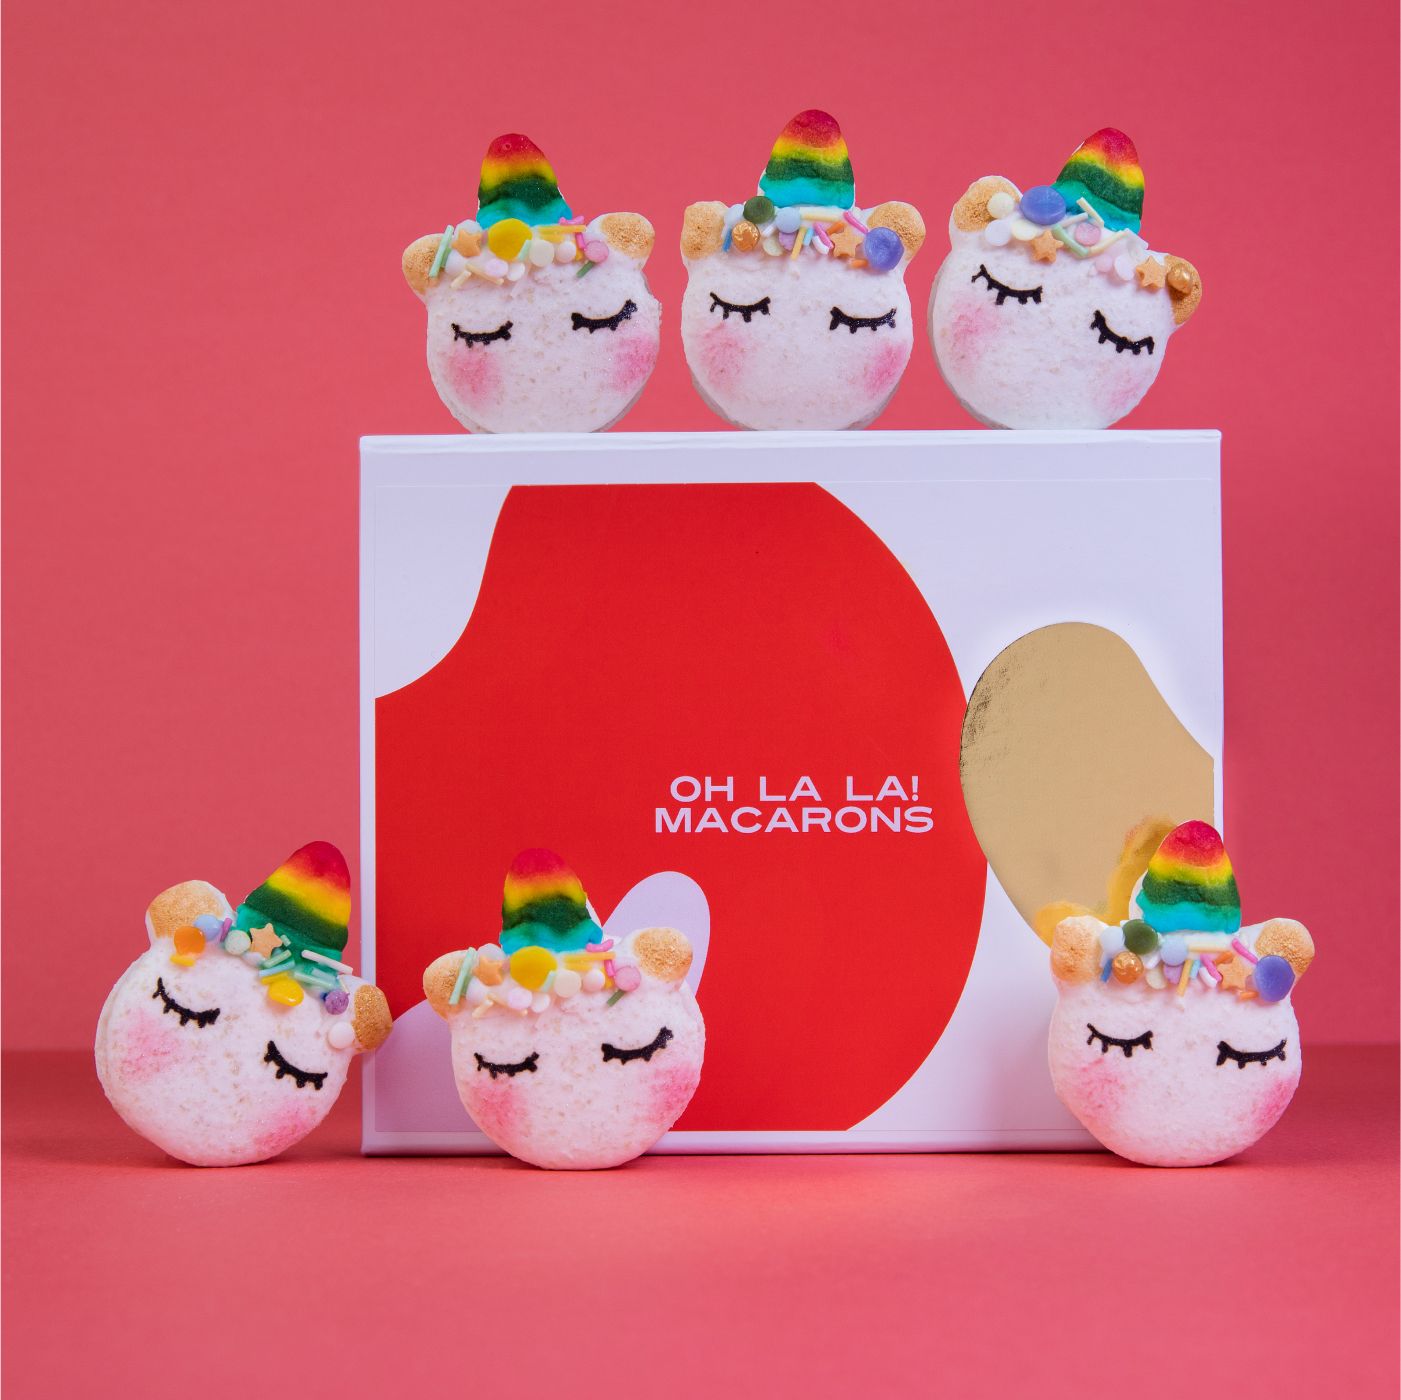 A display of white unicorn macarons with pink blush and rainbow horns